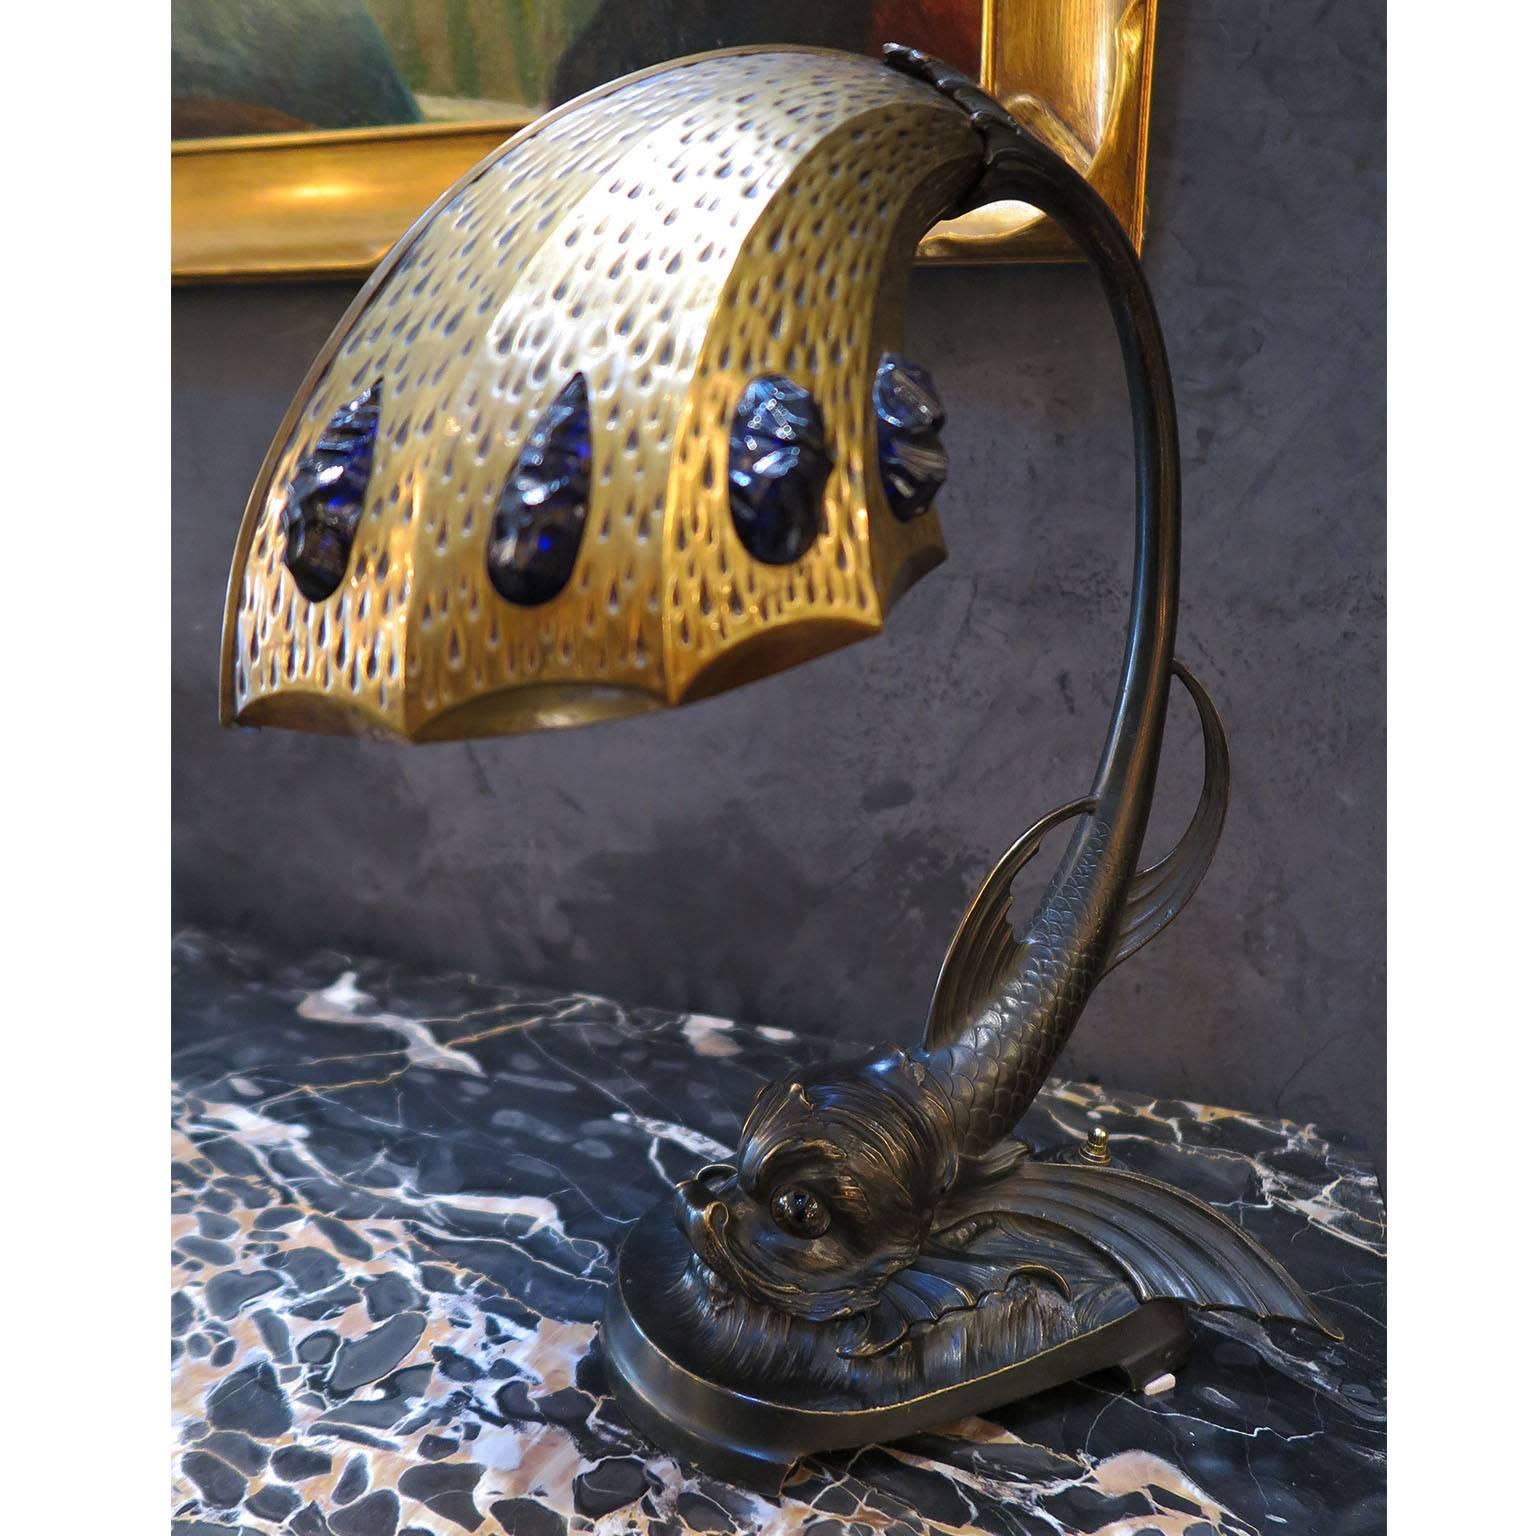 Rare Art Nouveau table lamp from France, circa 1900s-1910s. 
Dark bronze base in the shape of a fish with scales, fins, and large tale that leads into the stem of the lamp. The head of the fish is prominent with two glass eyes that light up from a